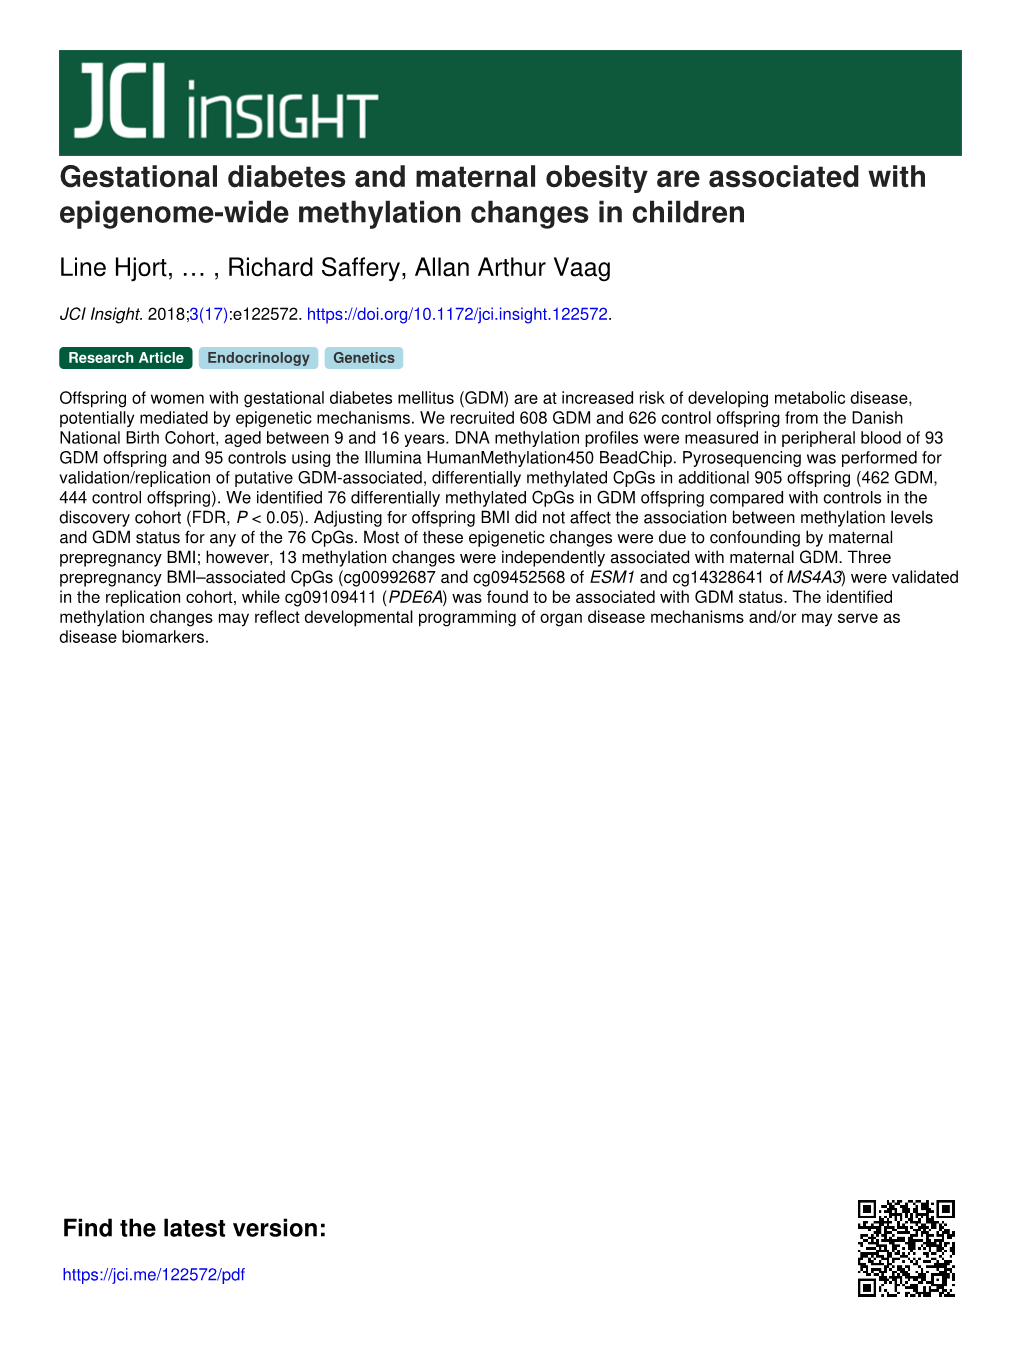 Gestational Diabetes and Maternal Obesity Are Associated with Epigenome-Wide Methylation Changes in Children